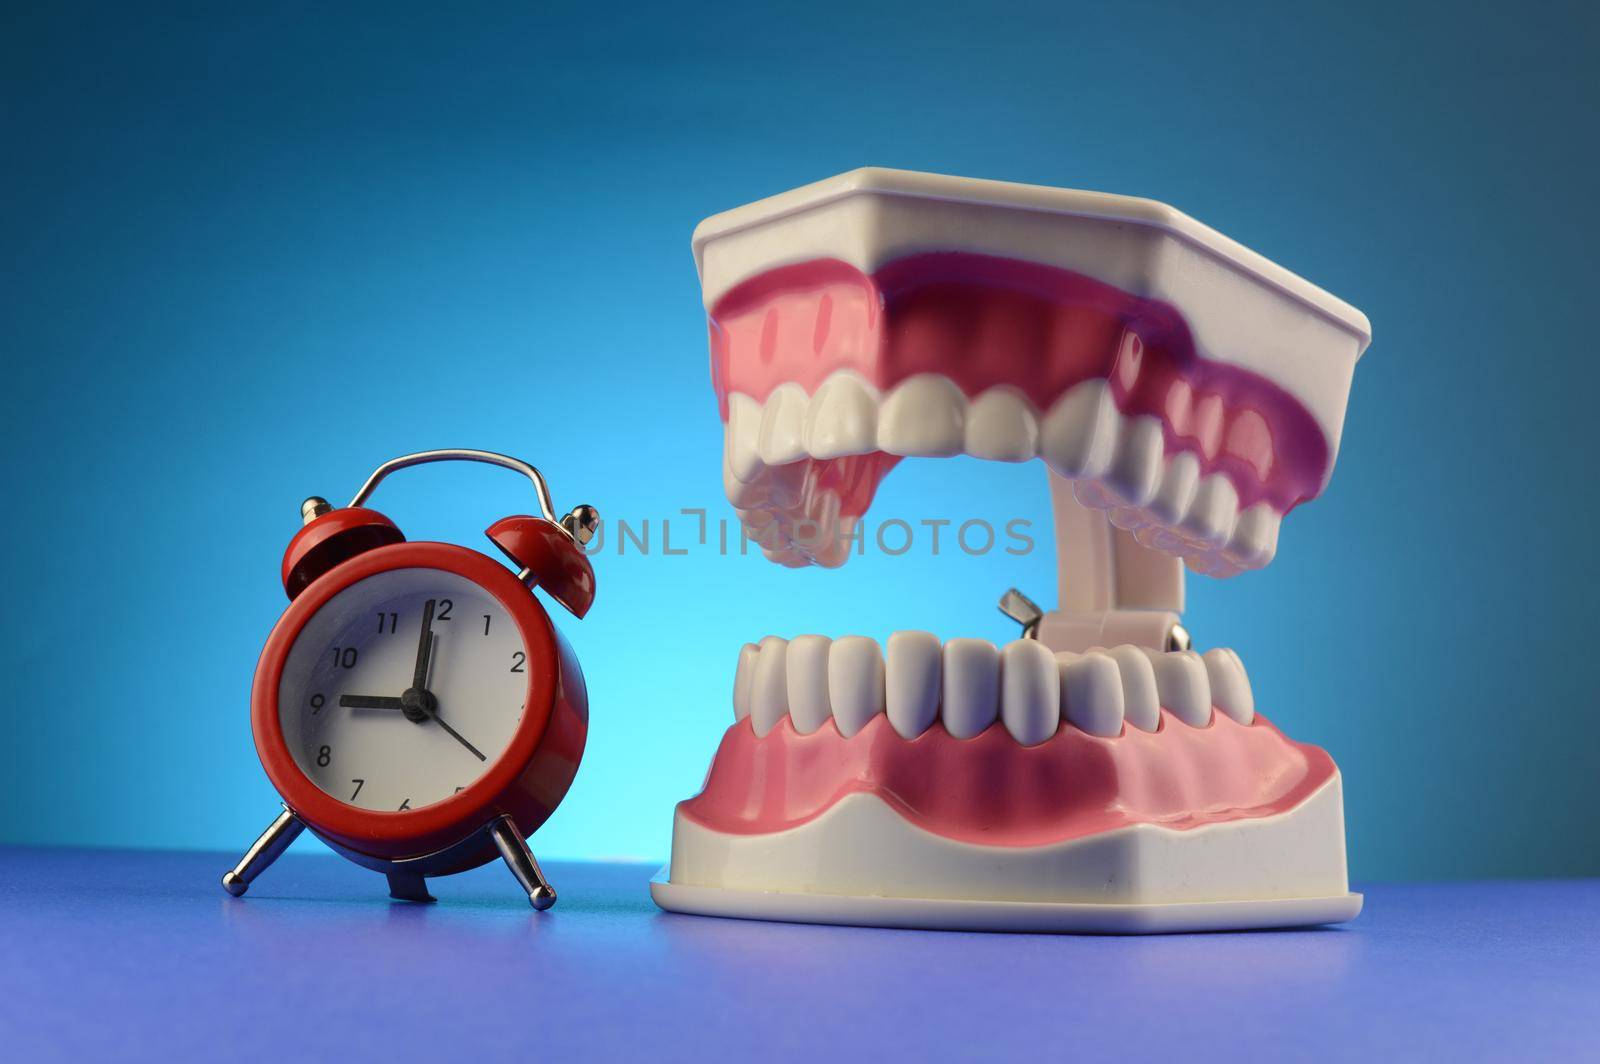 A clock and teeth display for dentist purposes.